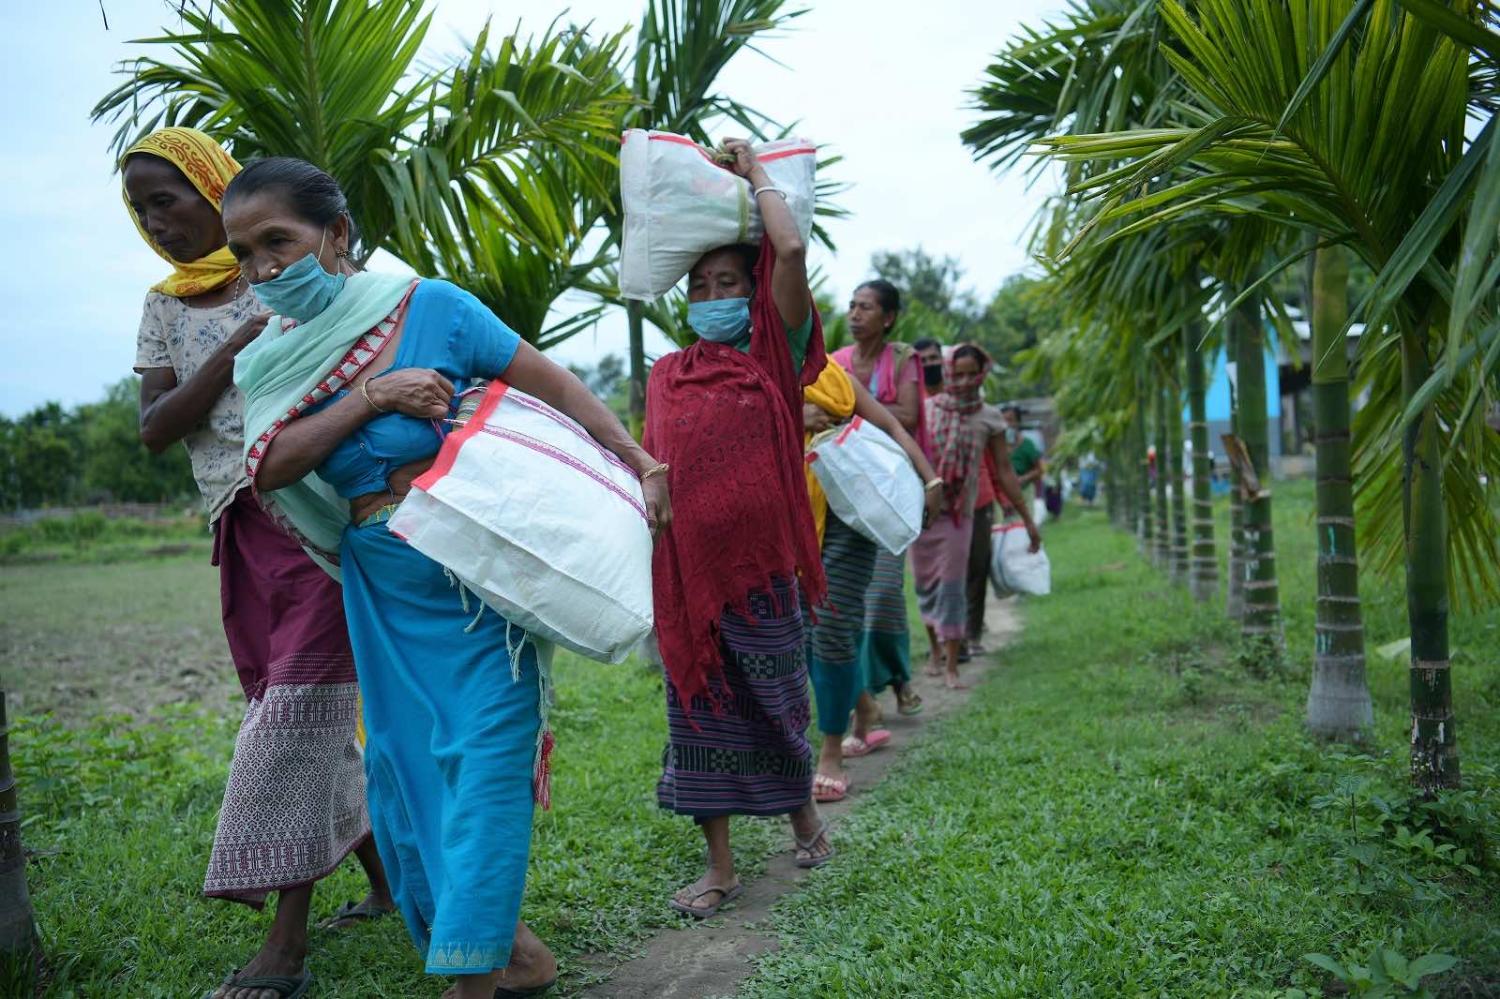 Residents carry food distributed by an NGO after the government eased Covid-19 restrictions in Jampuijala, India, 16 June 2021 (Str/Xinhua via Getty Images)